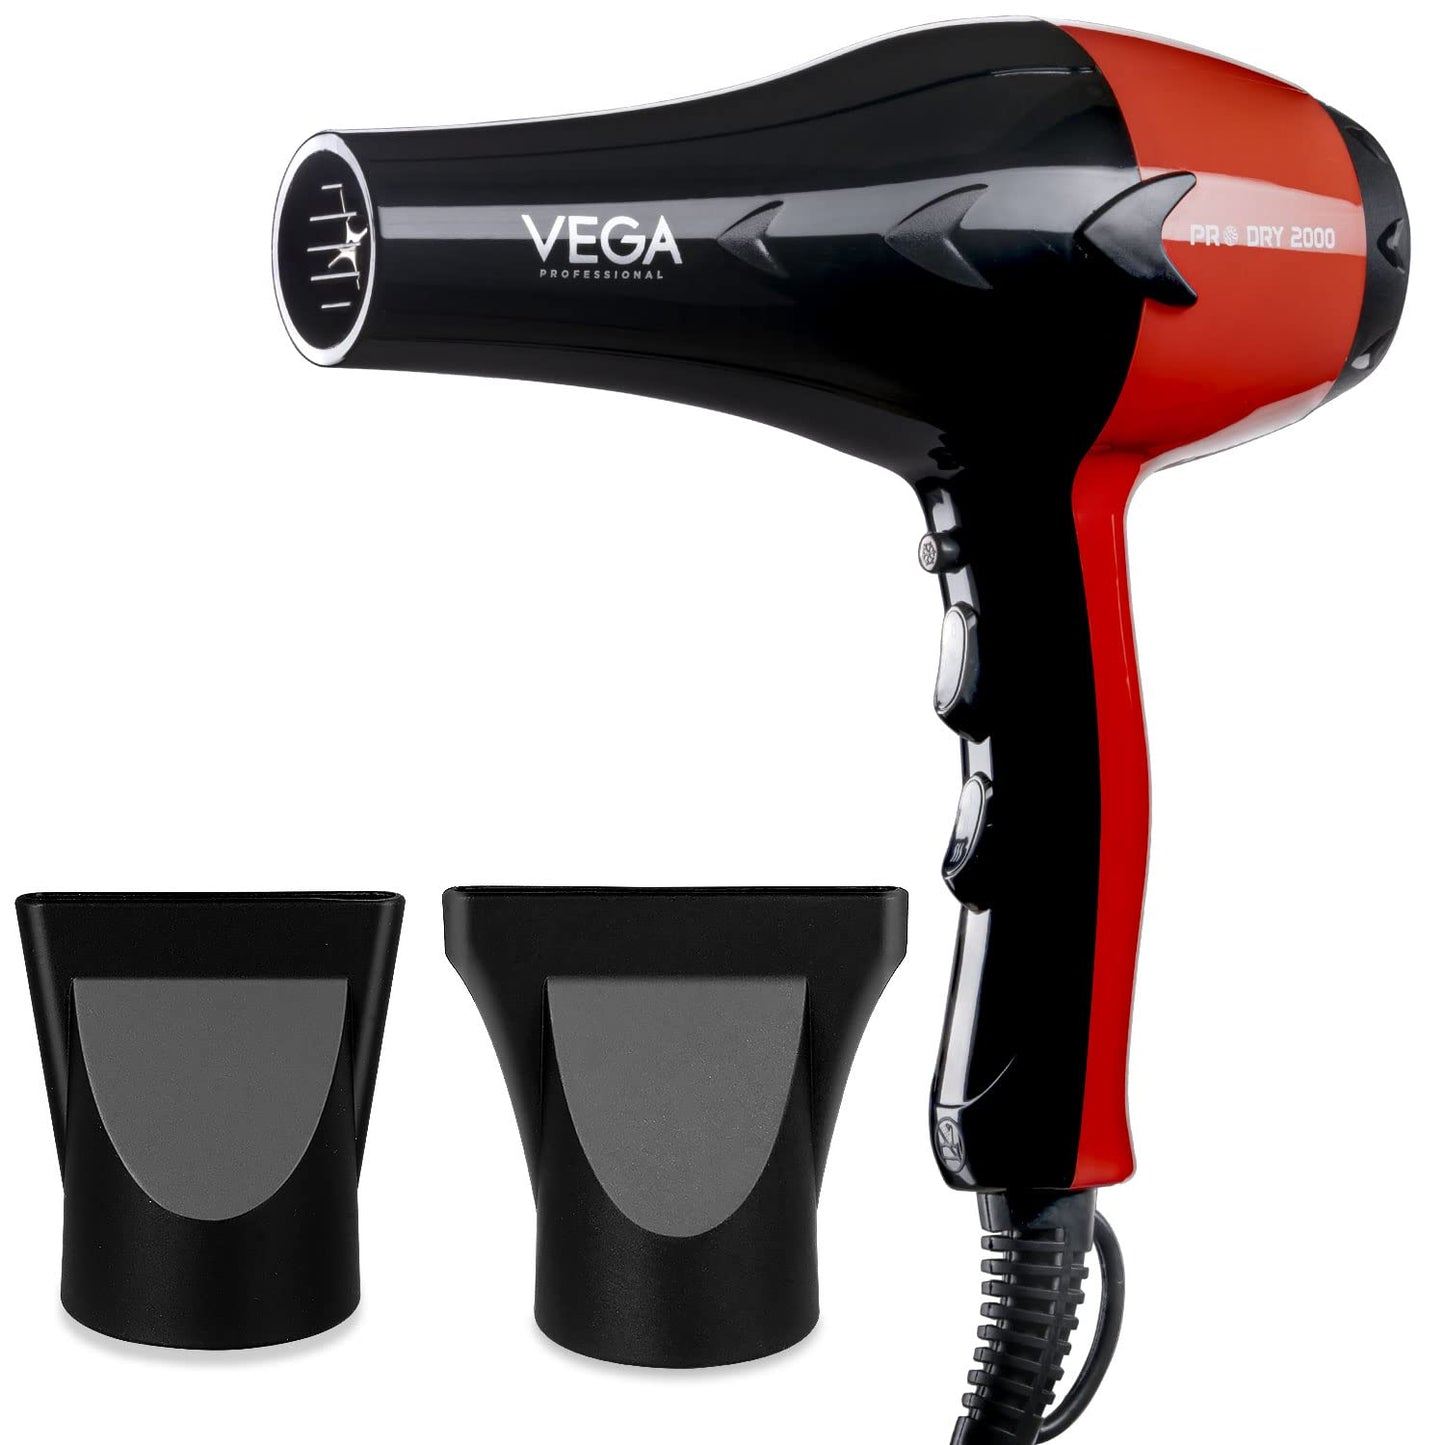 VEGA Professional Pro Dry 1800-2000W Hair Dryer for Men & Women with Cool Shot Button and 3 Heat & 2 Speed Settings, Red, (VPVHD-07)